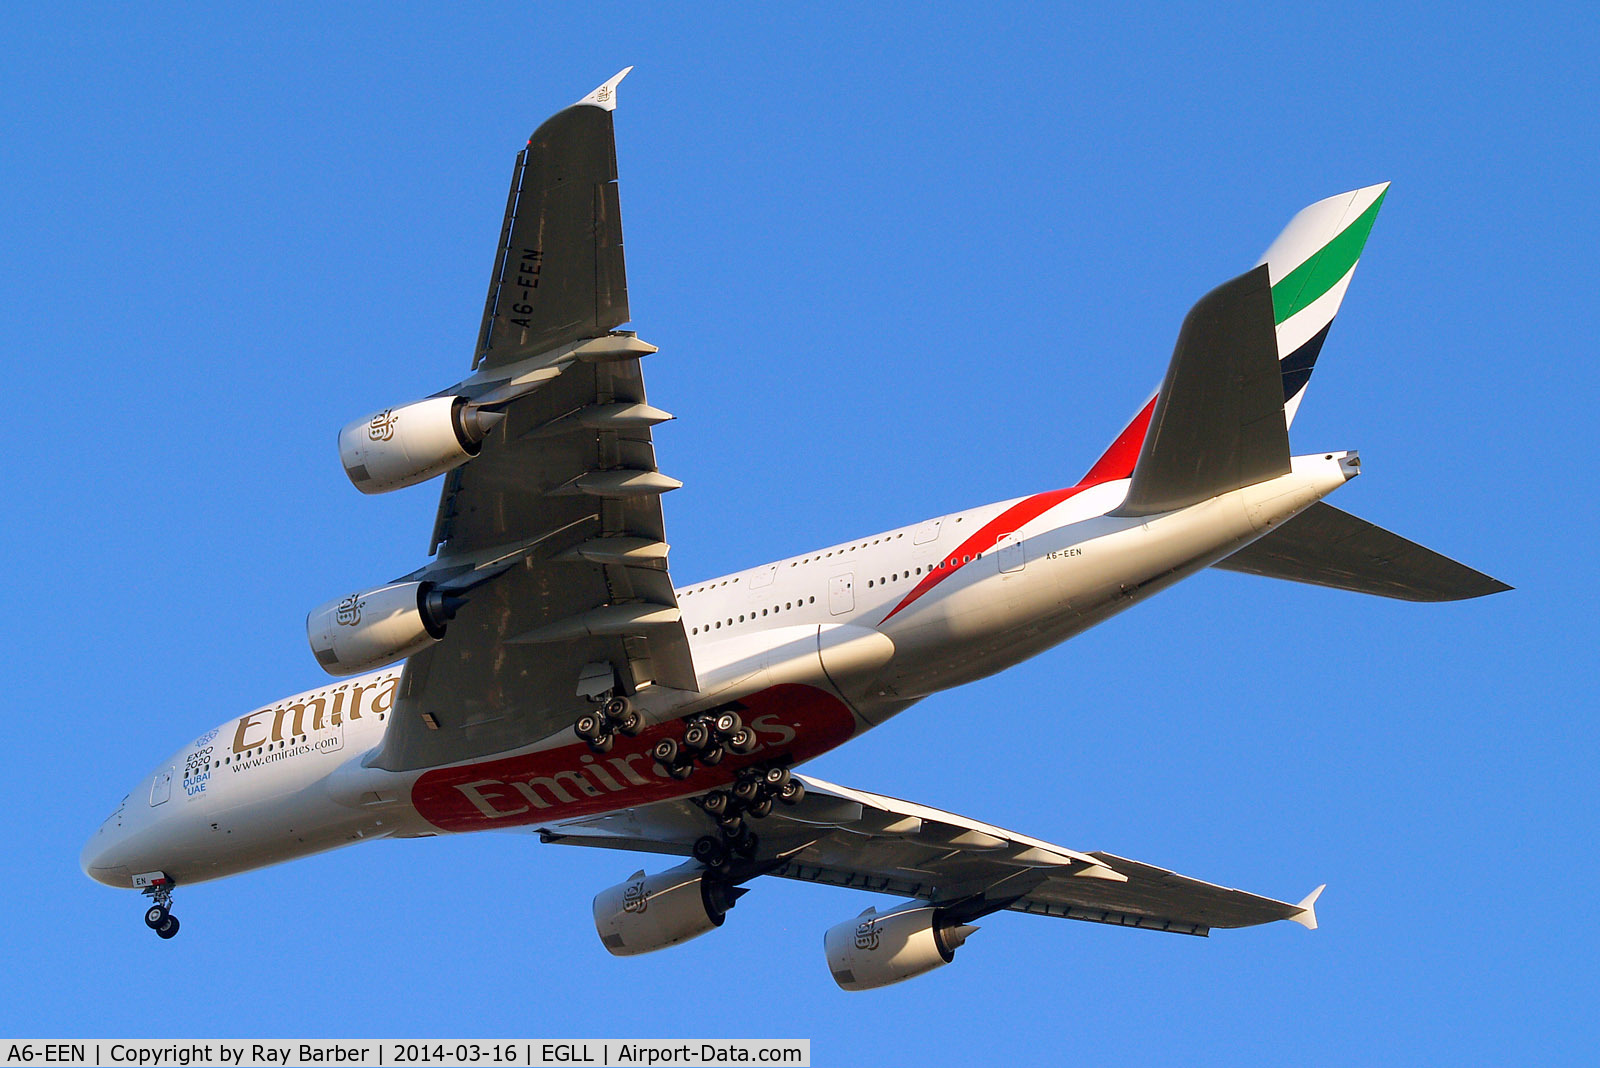 A6-EEN, 2013 Airbus A380-861 C/N 135, Airbus A380-861 [135] (Emirates Airlines) Home~G 16/03/2014. On approach 27R.